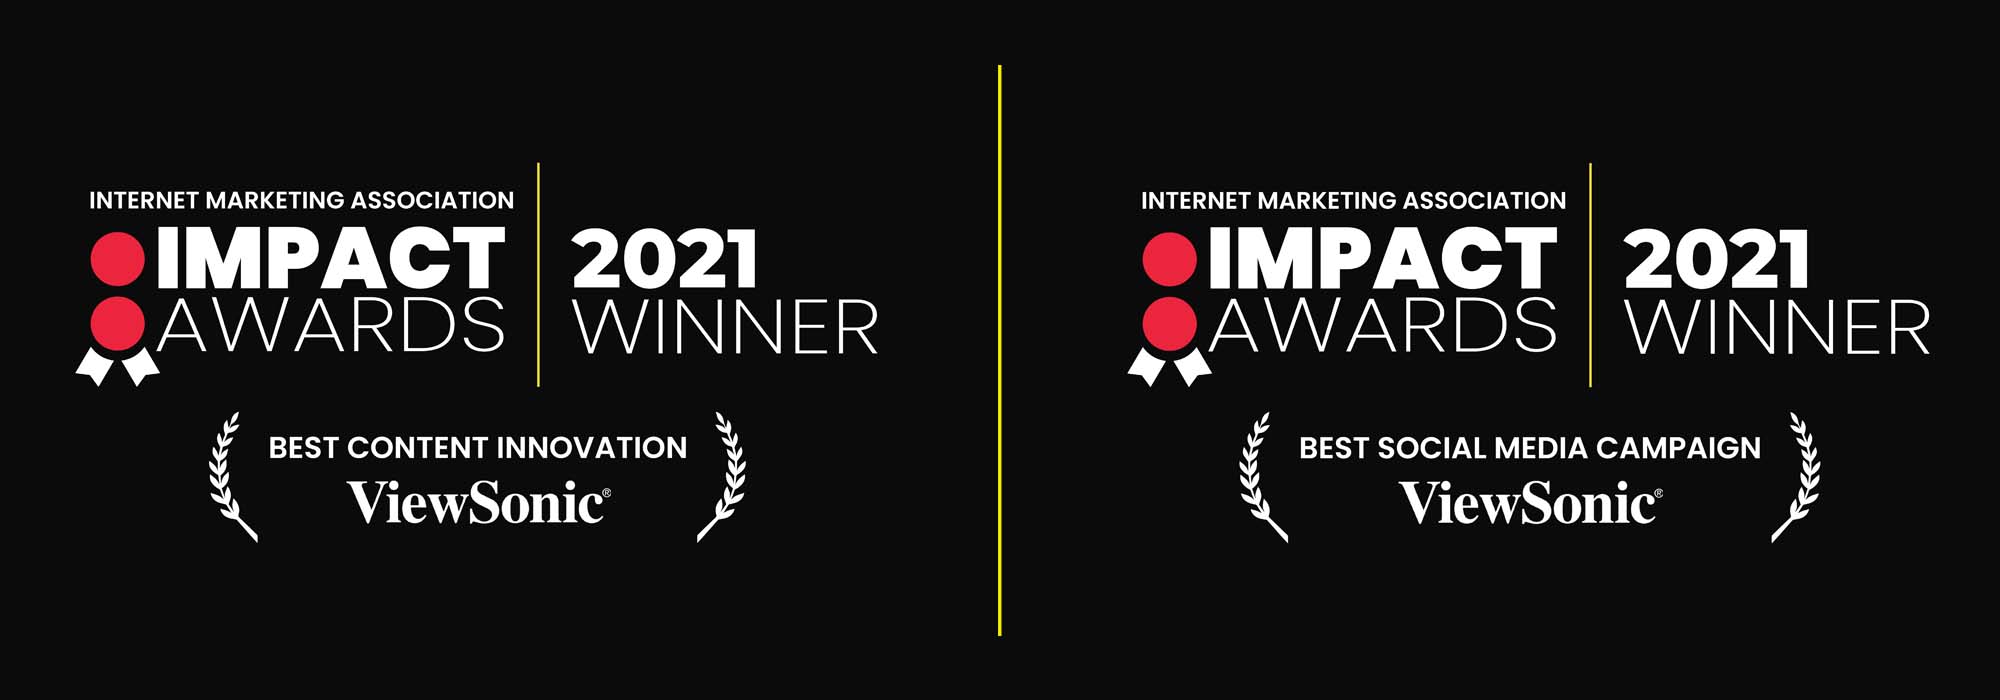 ViewSonic Receives Awards for Best Social Media Campaign and Best Content Innovation at Impact 2021